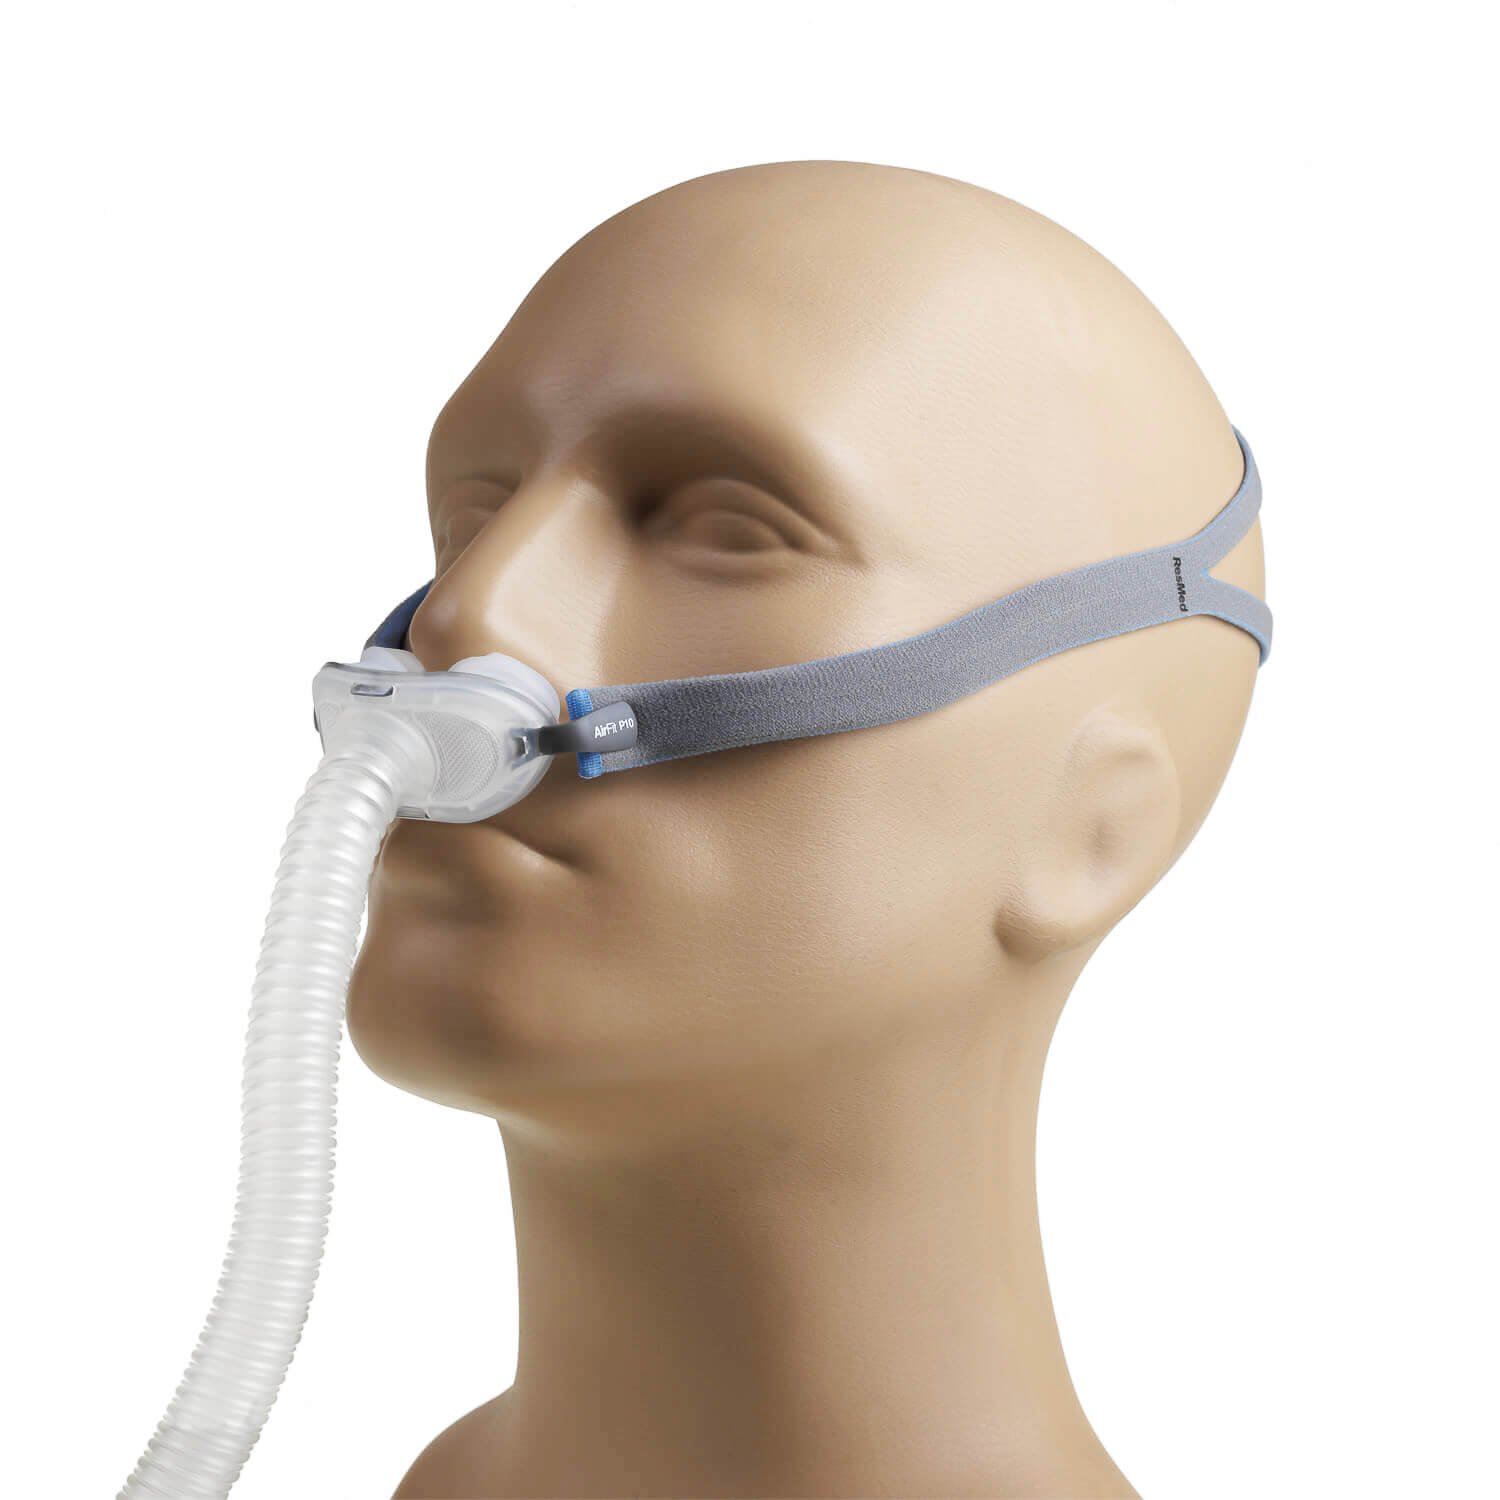 New Airfit P10 Nasal Pillow Cpap Mask With Headgear Kit Size Sml In 8122